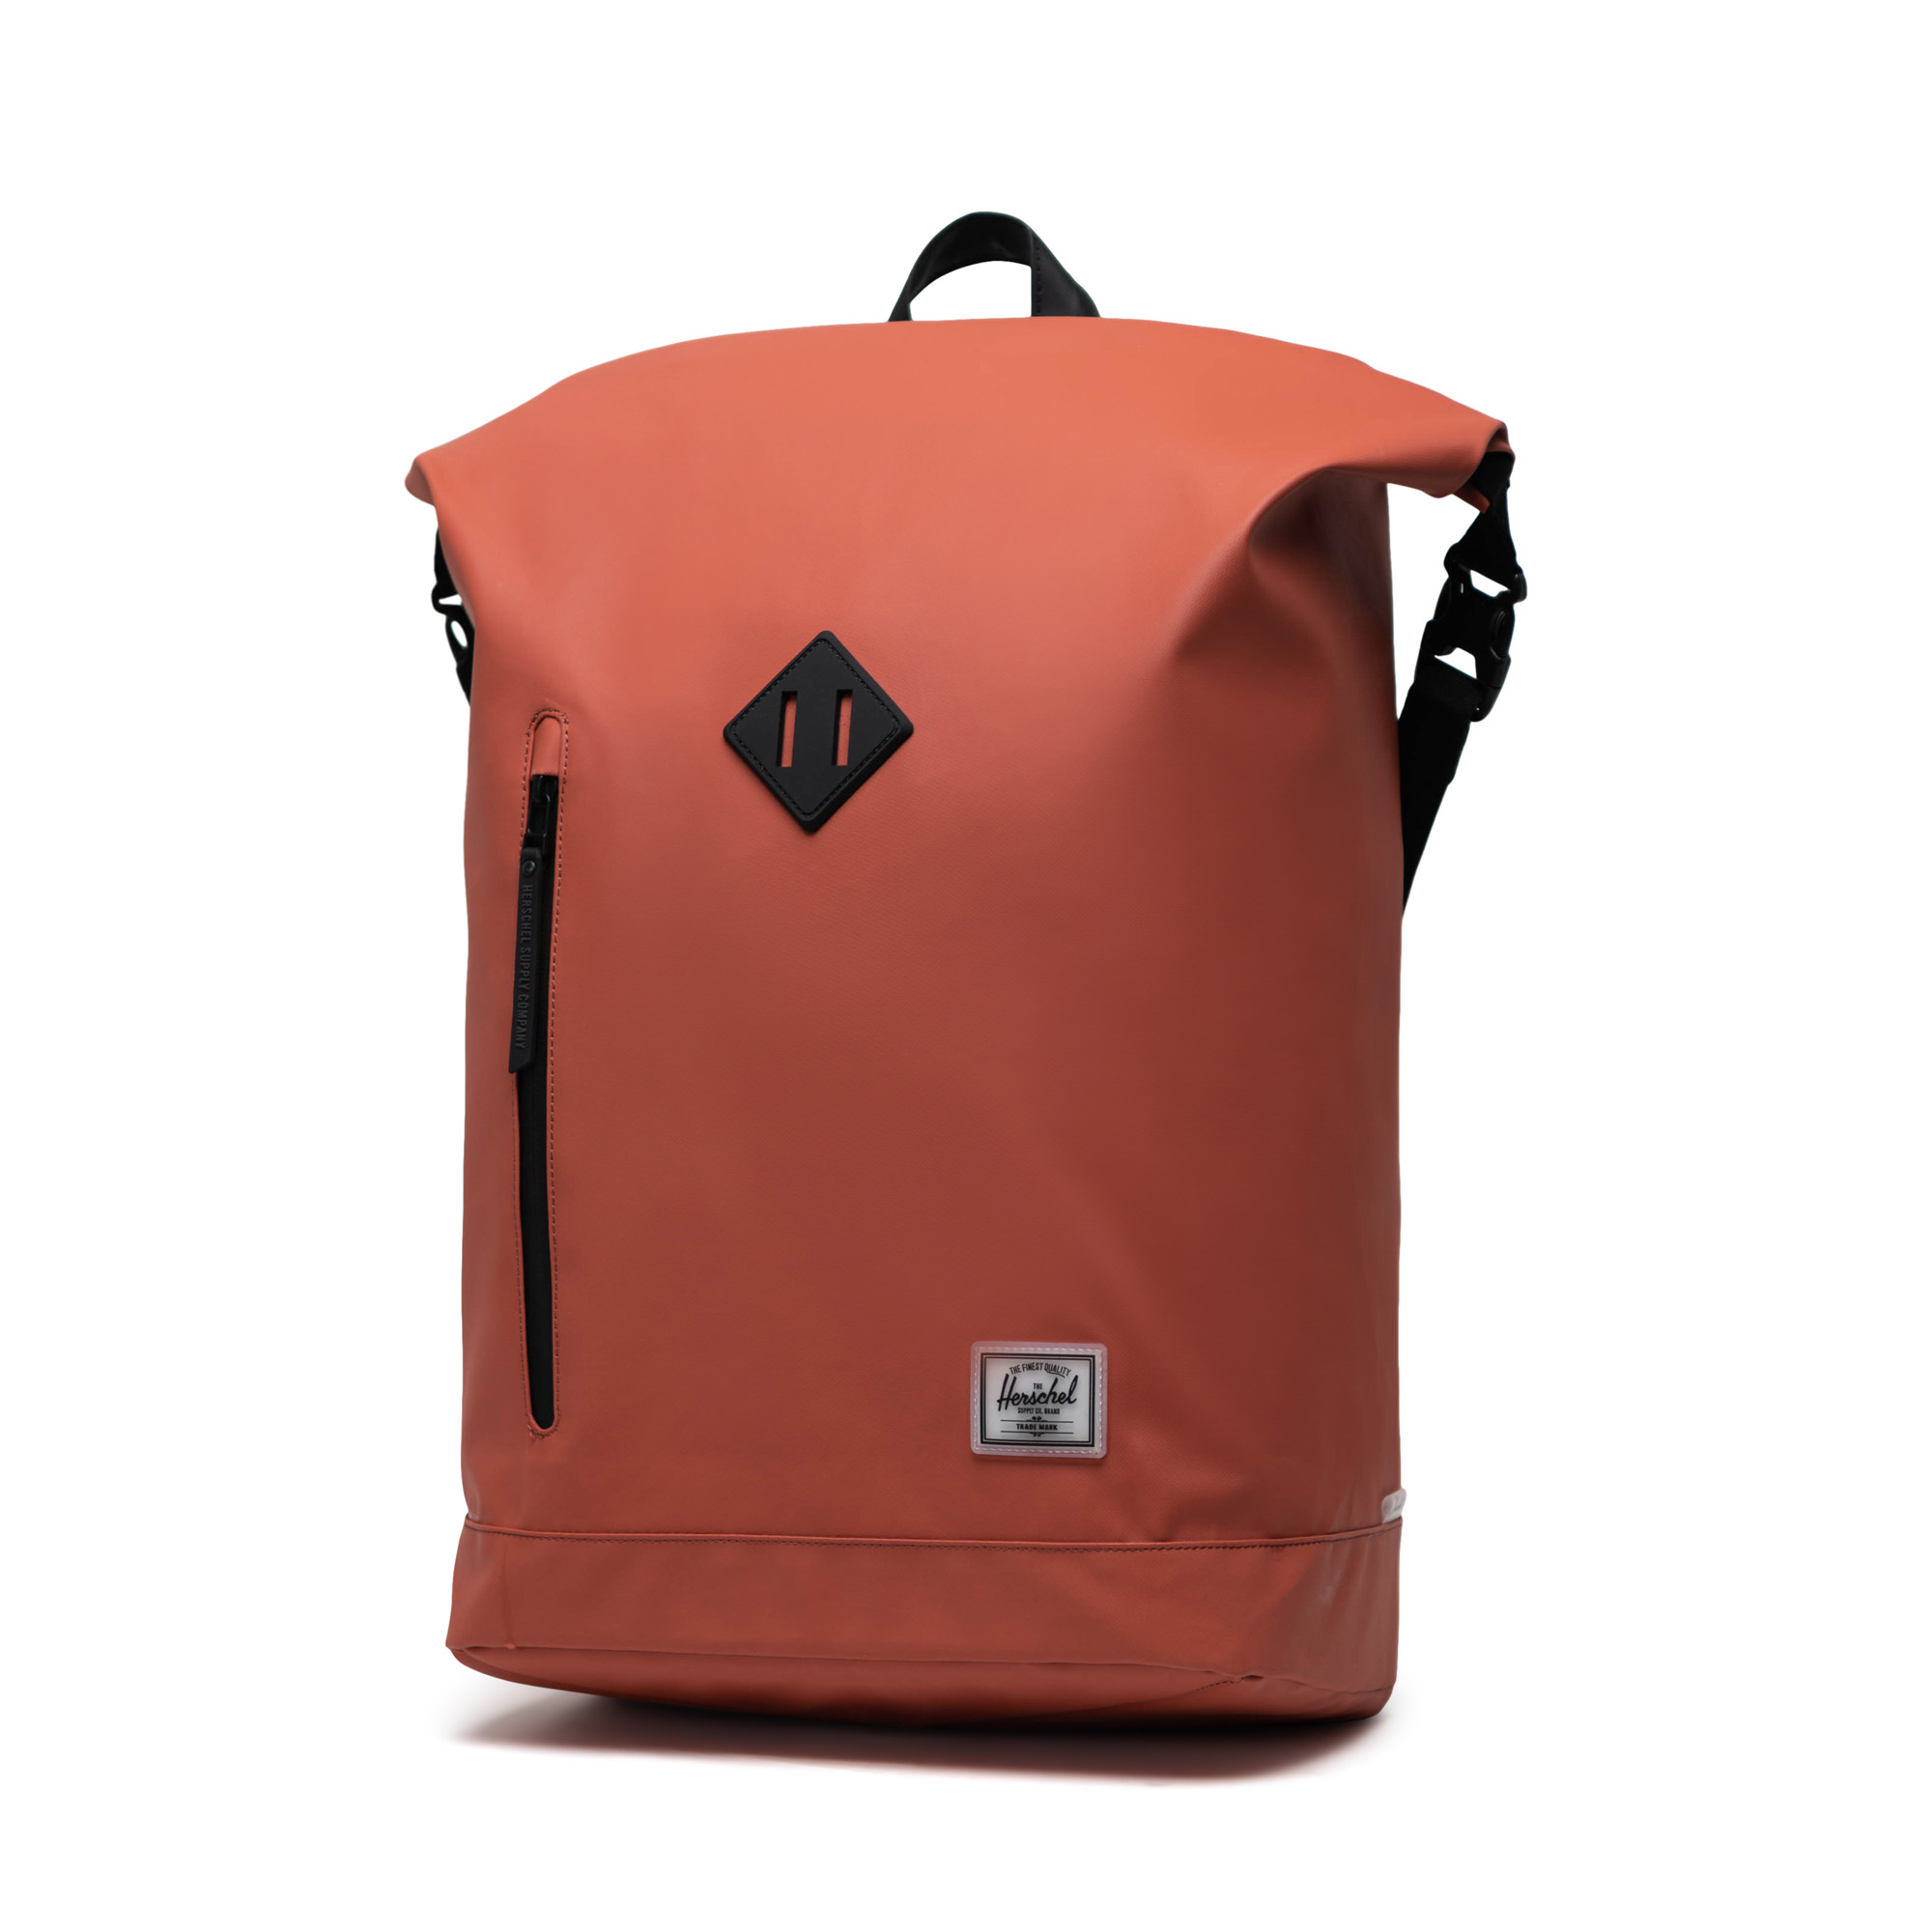 Roll Top Backpack Weather Resistant